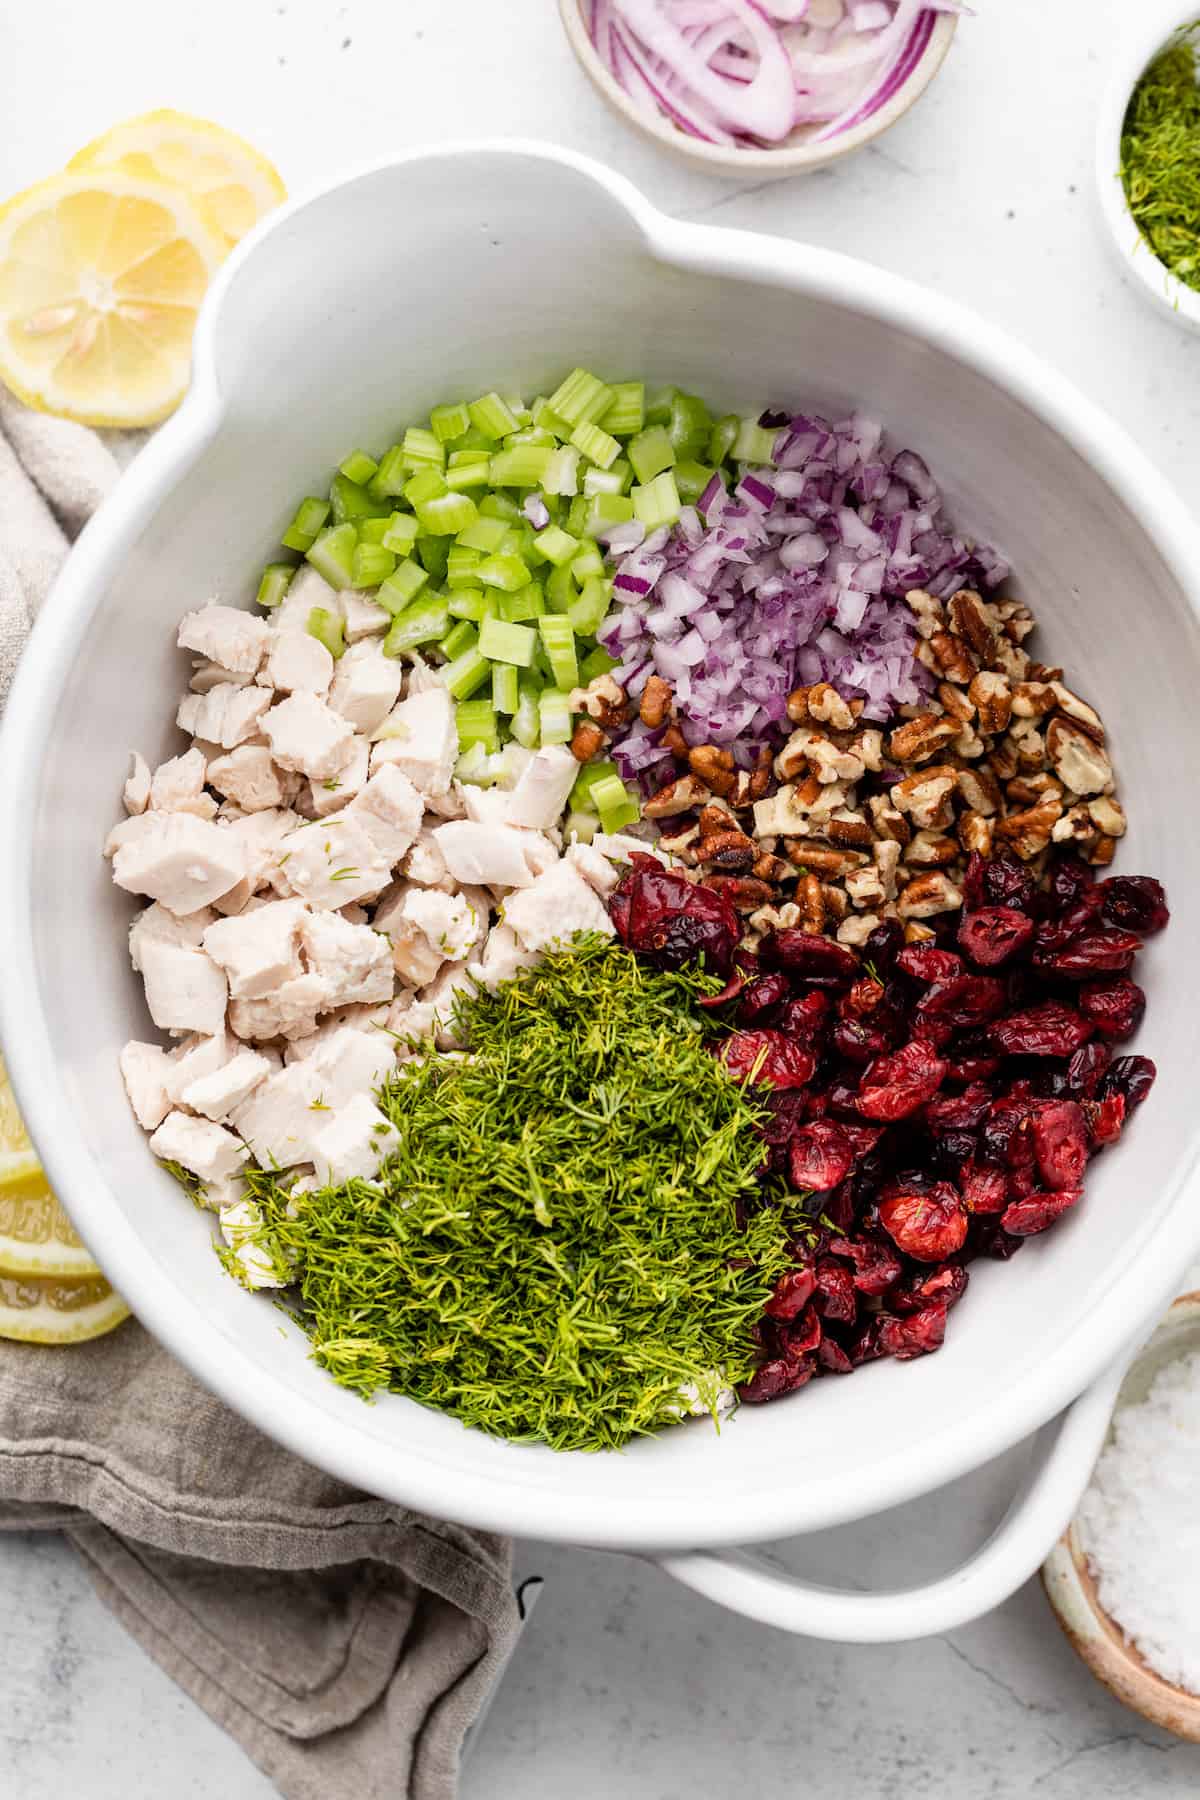 chicken salad ingredients in mixing bowl